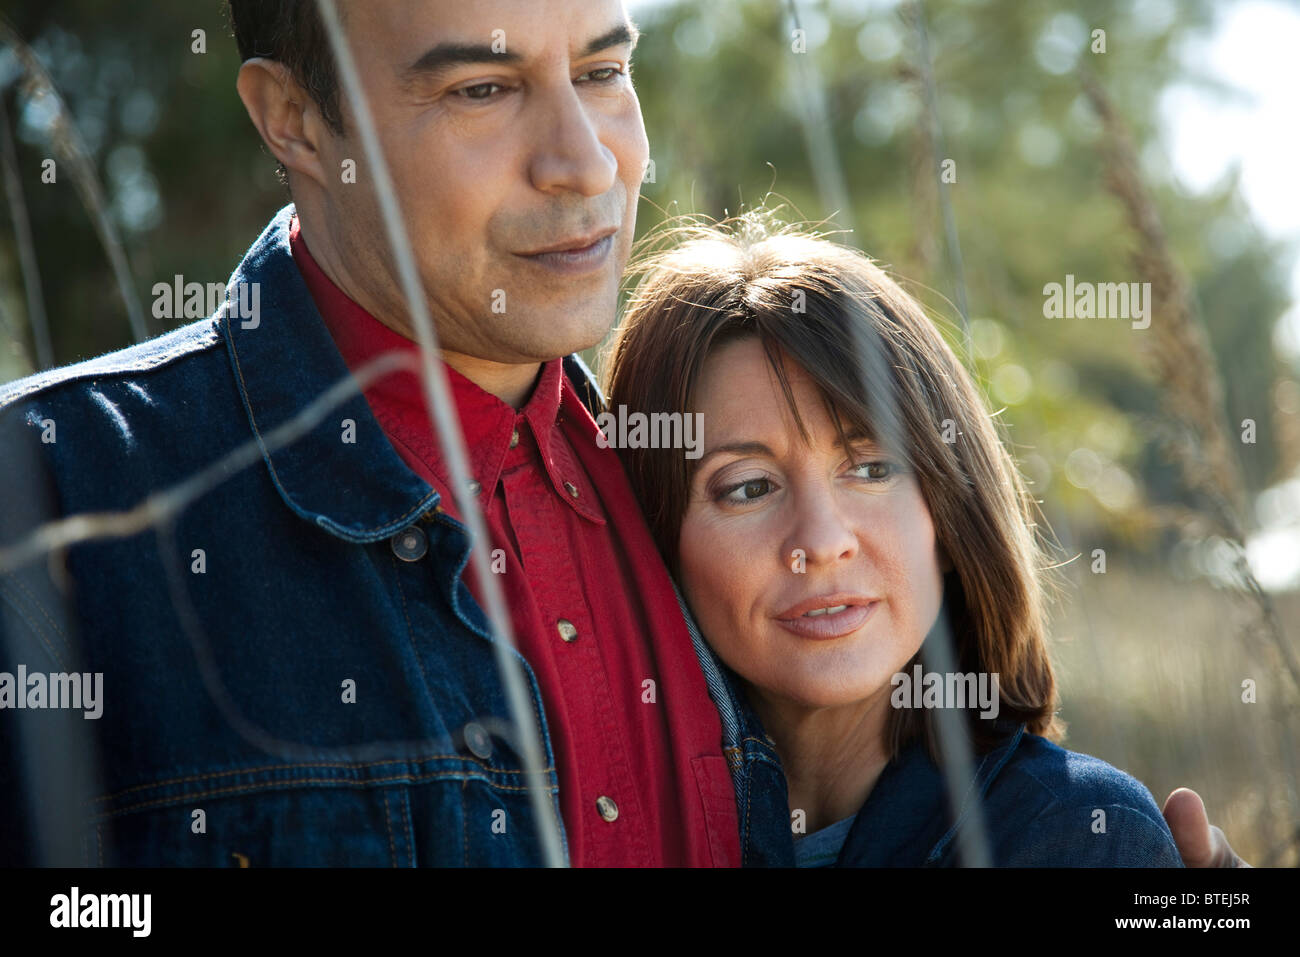 Young couple relaxing together outdoors, portrait Banque D'Images